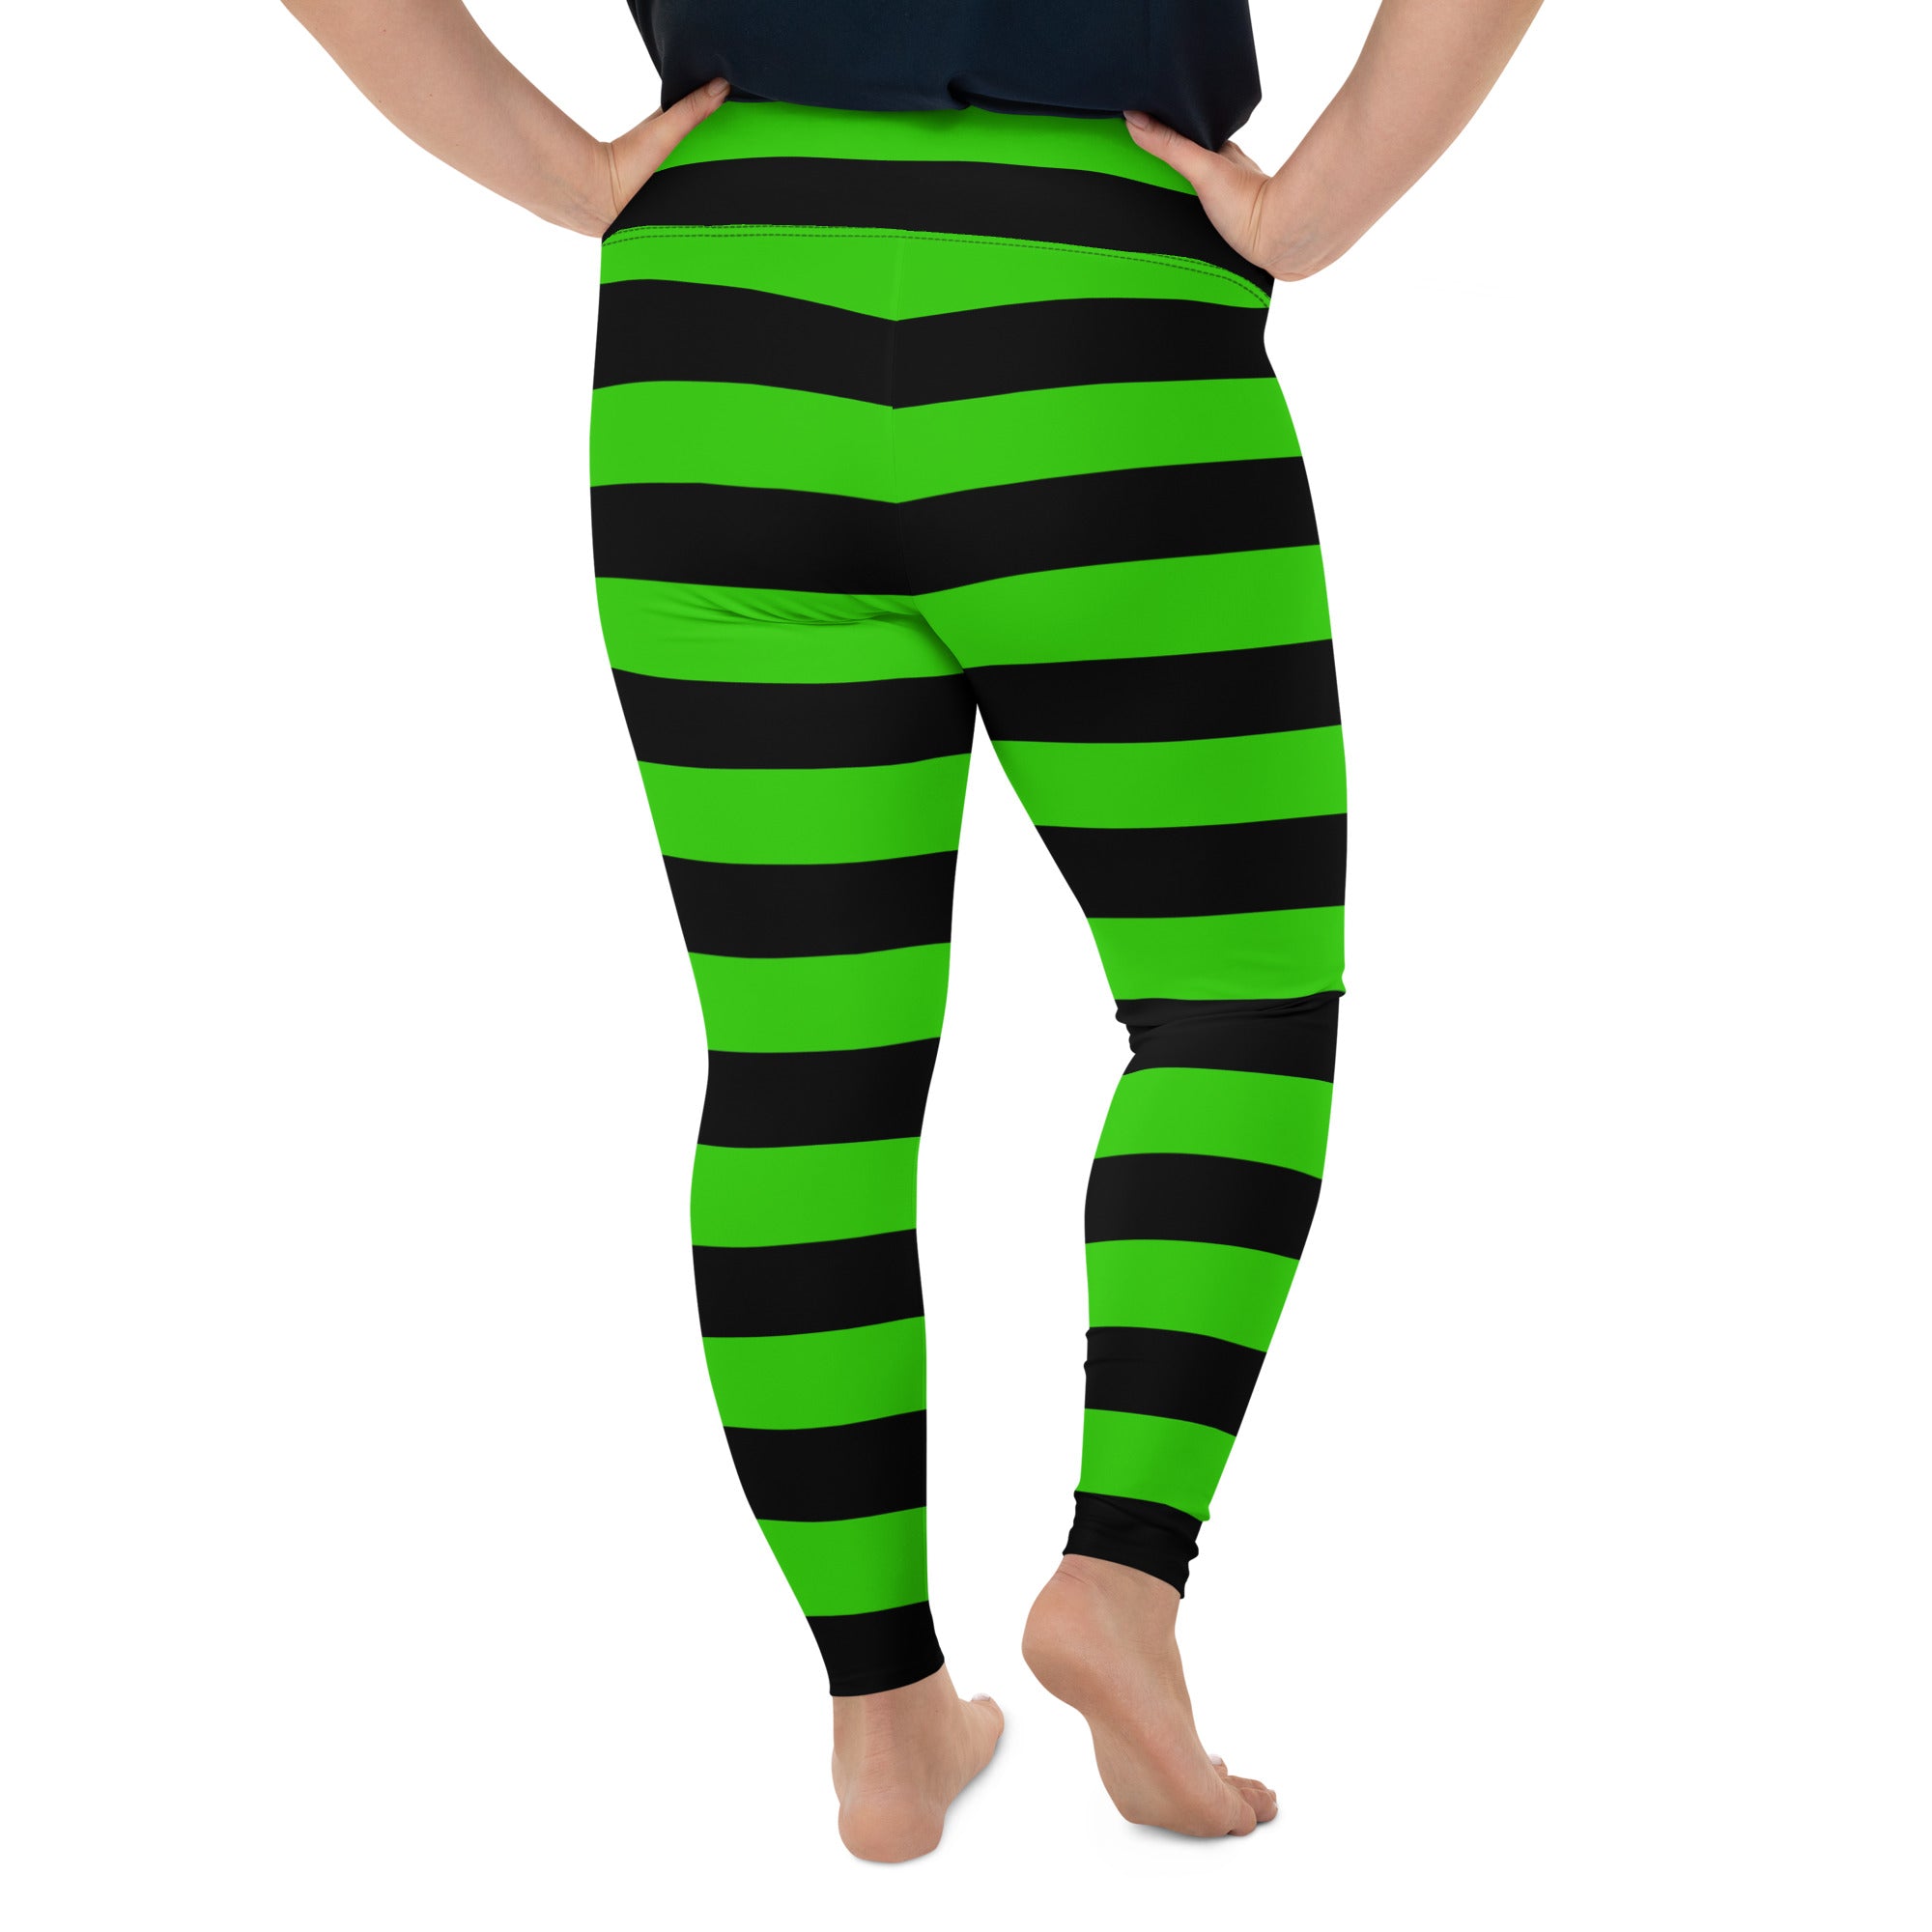 Witch's Green and Black Stripe Plus Size Leggings